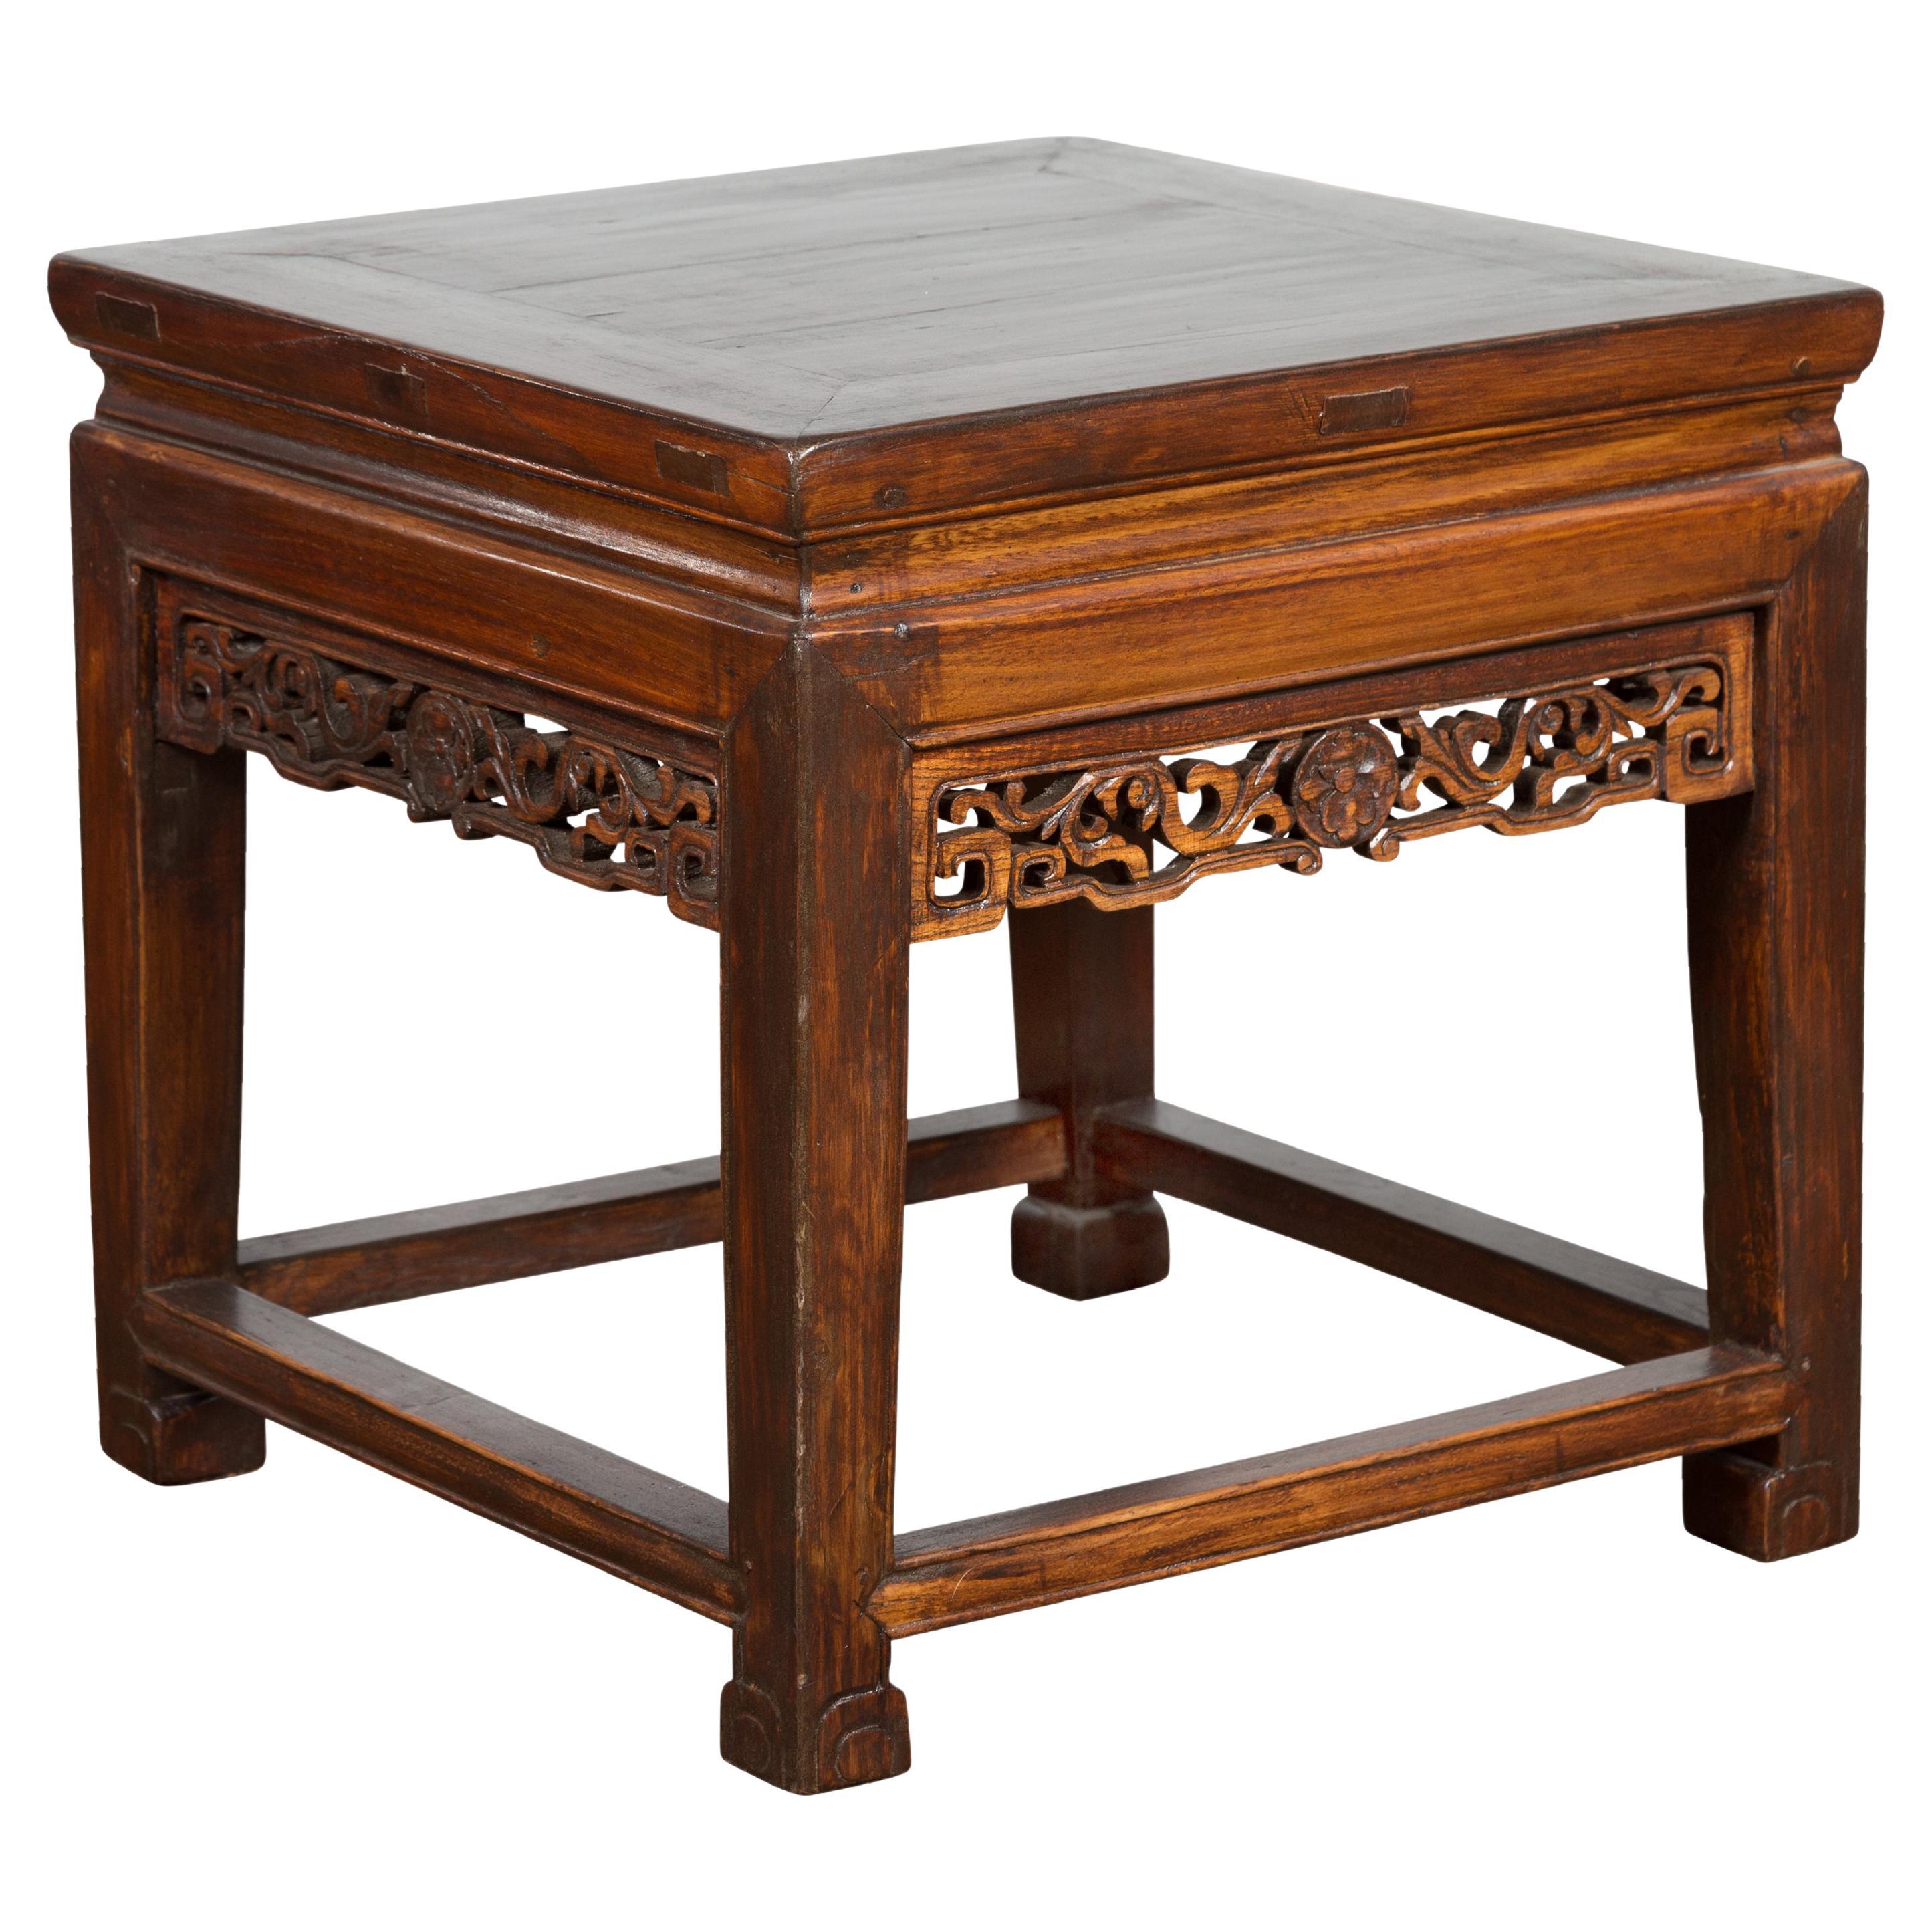 Small Square Low End Table with Carved Apron